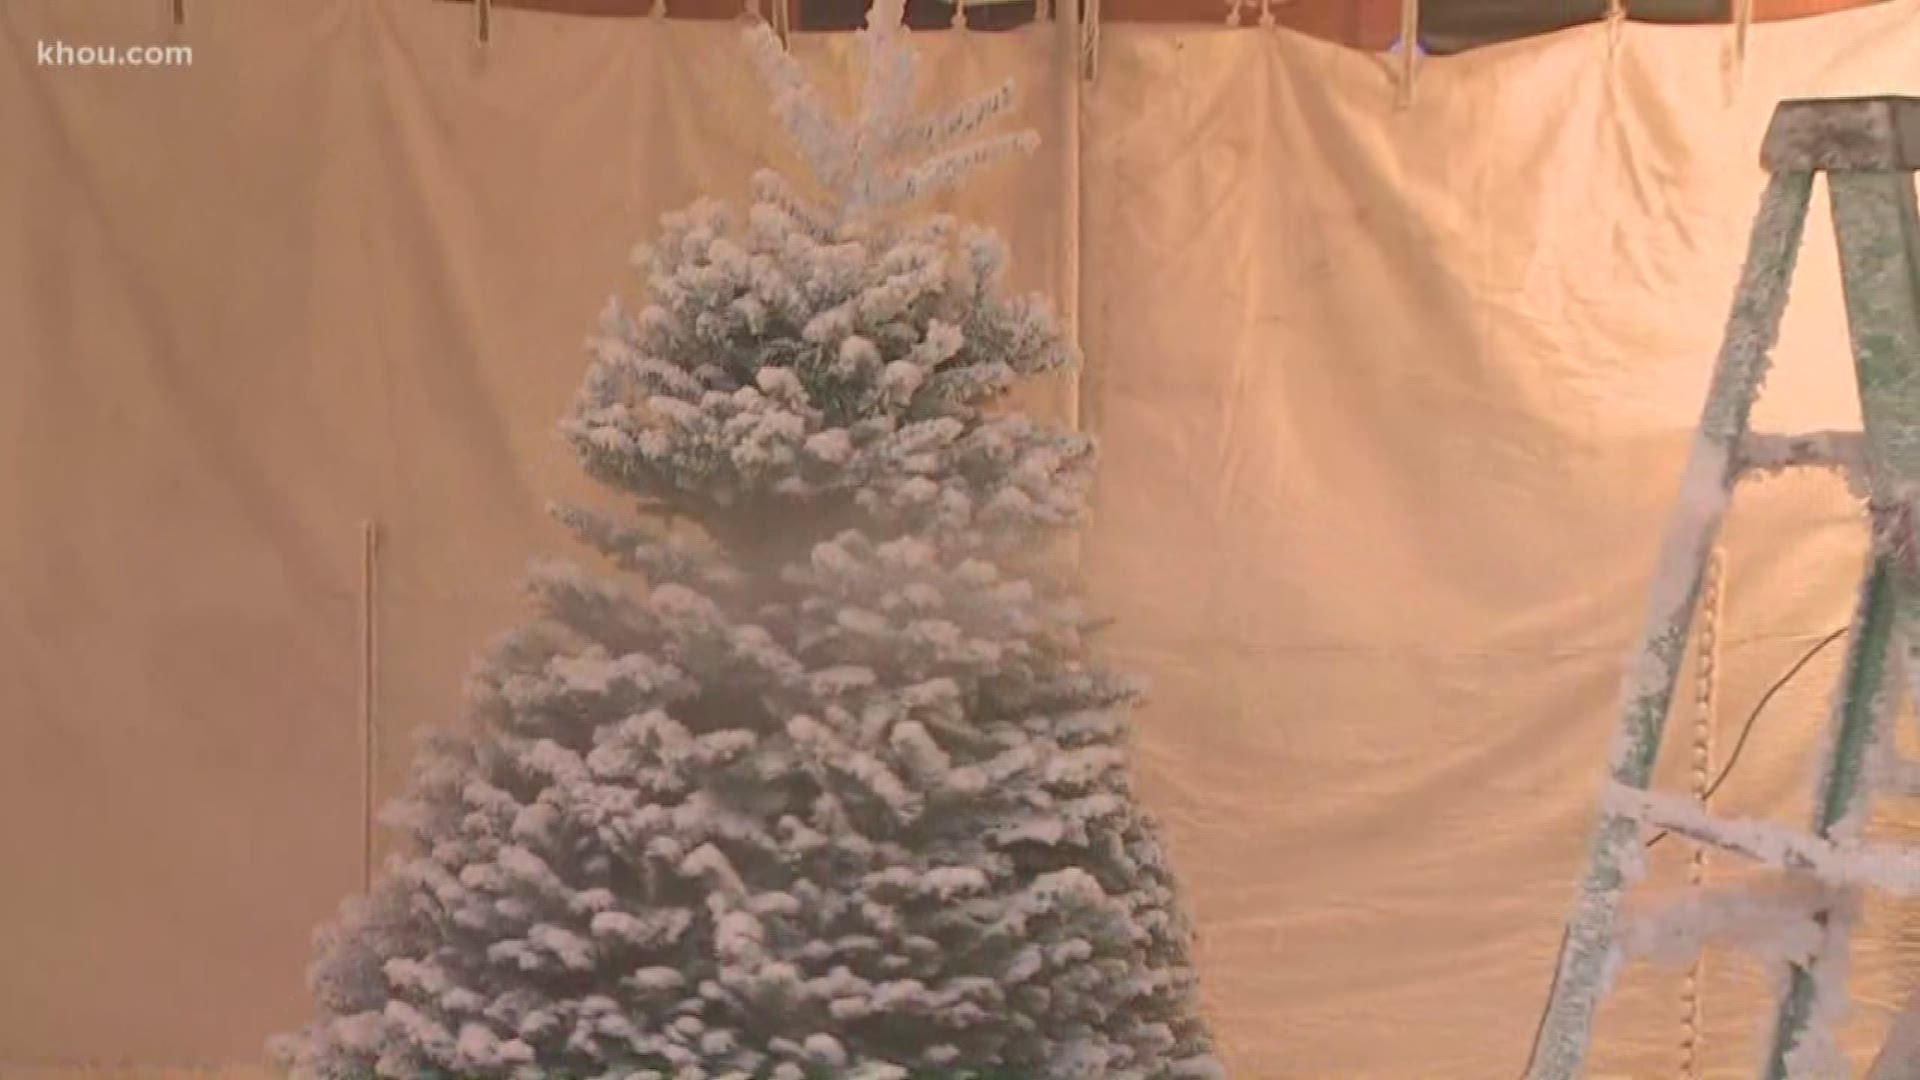 Still sprucing up your home for the holidays but aren't sure how to choose the best Christmas tree to deck the halls?